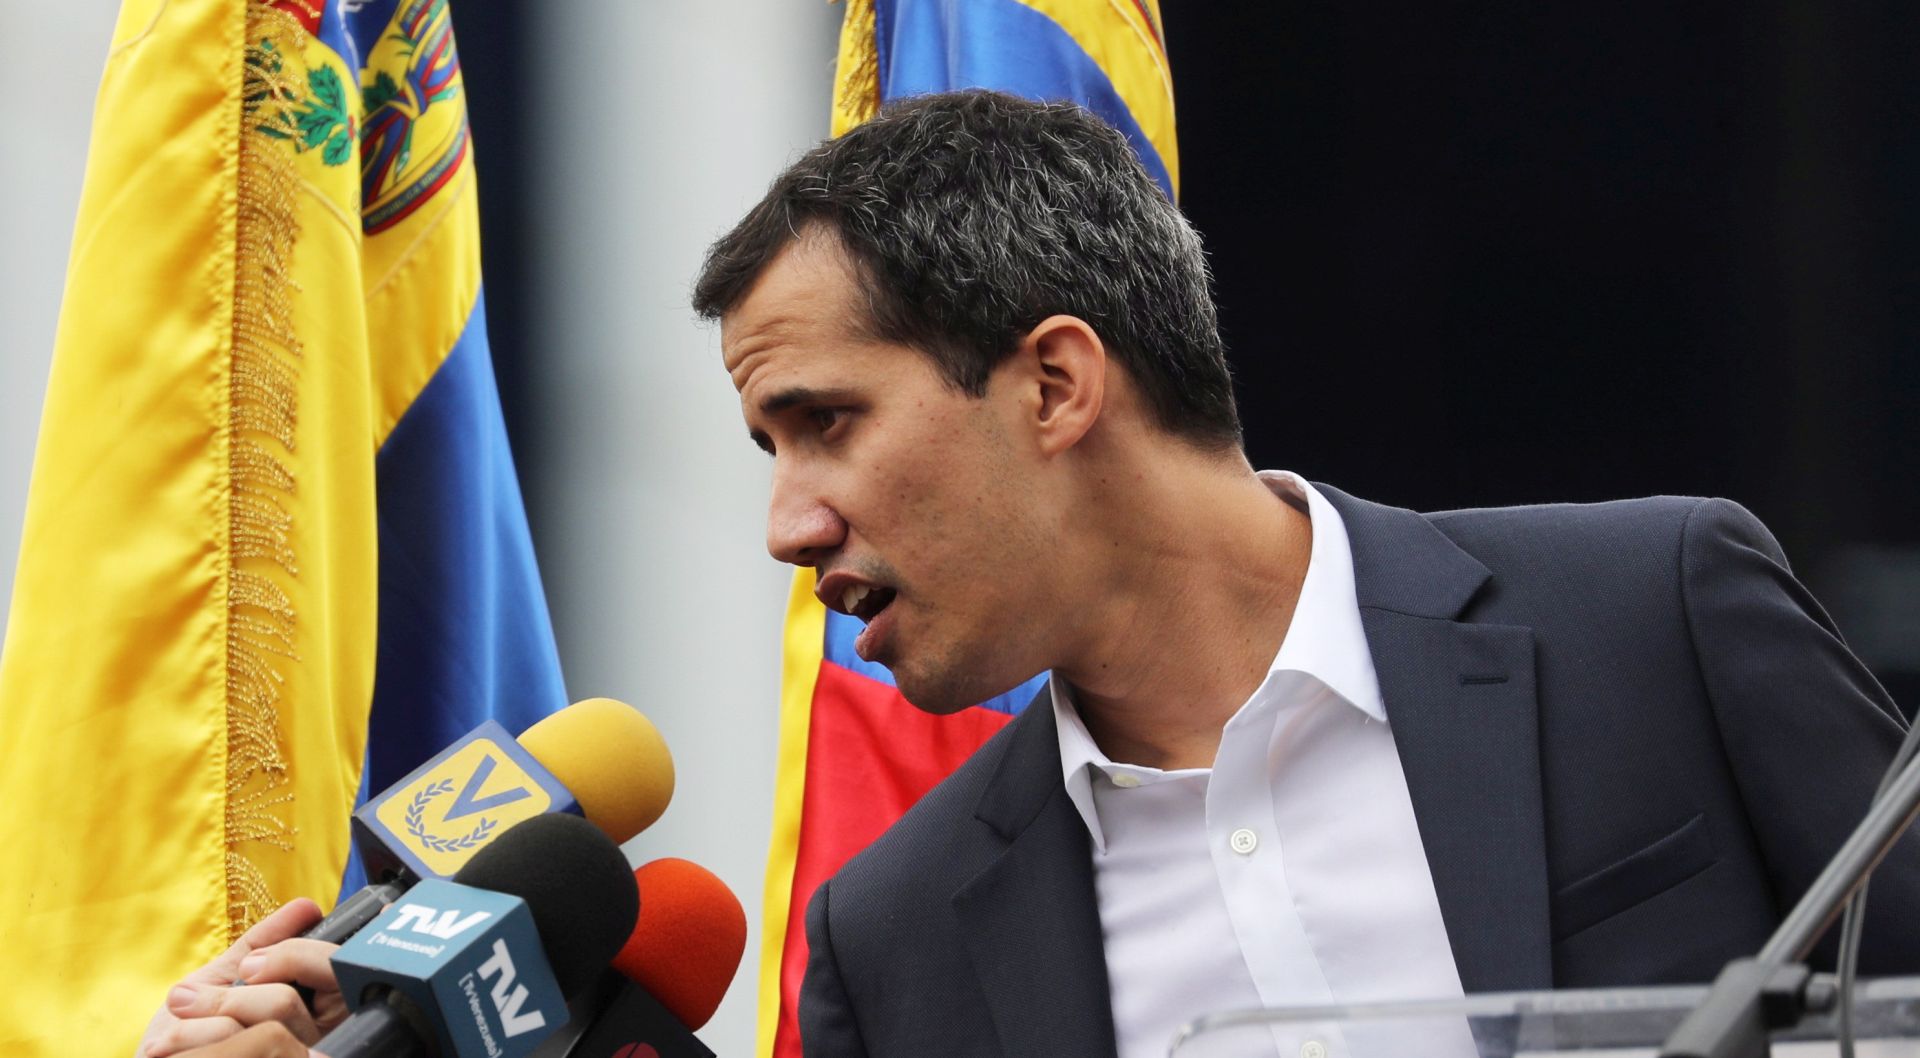 epa07312961 Juan Guaido, President of the Venezuelan Parliament, speaks to press as he announces that he assumes executive powers, in Caracas, Venezuela, 23 January 2019. Guaido declared himself interim president of Venezuela - a move that was quickly recognised by US President Trump -  in fight against President Maduro whose presidency Guaido considers 'illegitimate'. The USA and South American countries have been pressing for Maduro's ouster more strongly in the past weeks, aimed to end his presidency after years of crisis.  EPA/Miguel Gutiérrez